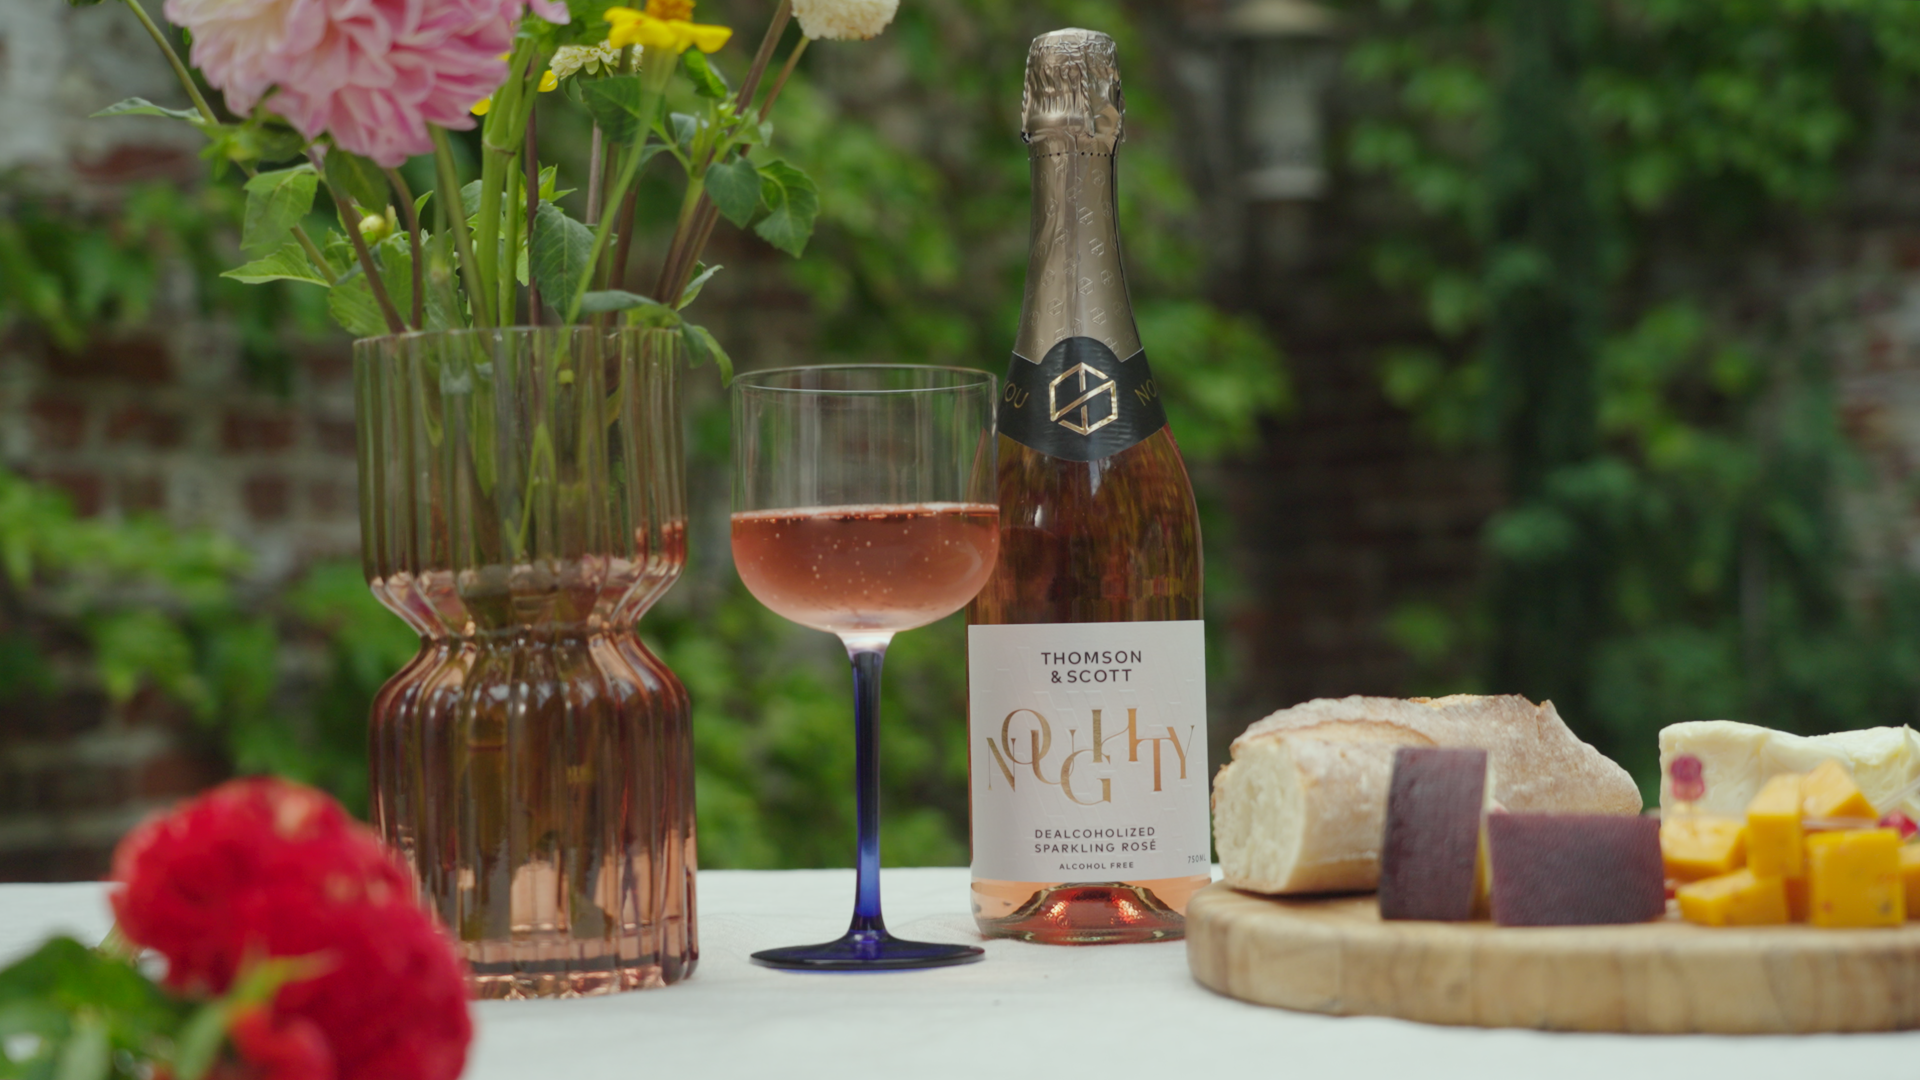 Thomson & Scott's Noughty Alcohol Free Sparkling Rose 